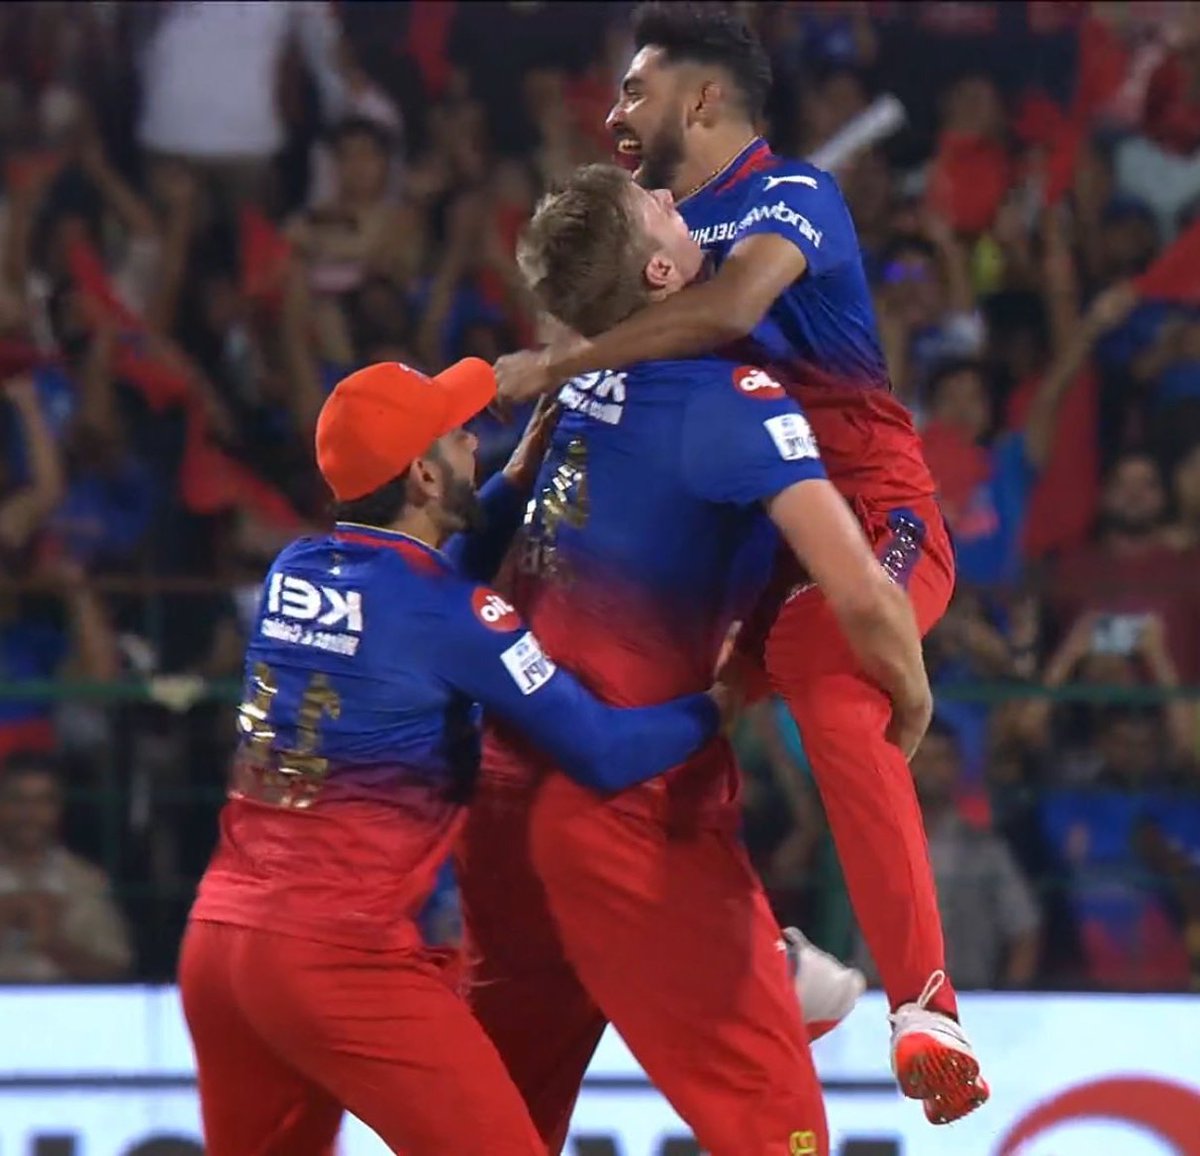 This is funny during the celebration after wicket, at least one player climbs on green like he is a tree,if they don't the man himself will carry someone 😭😭🤣🥹